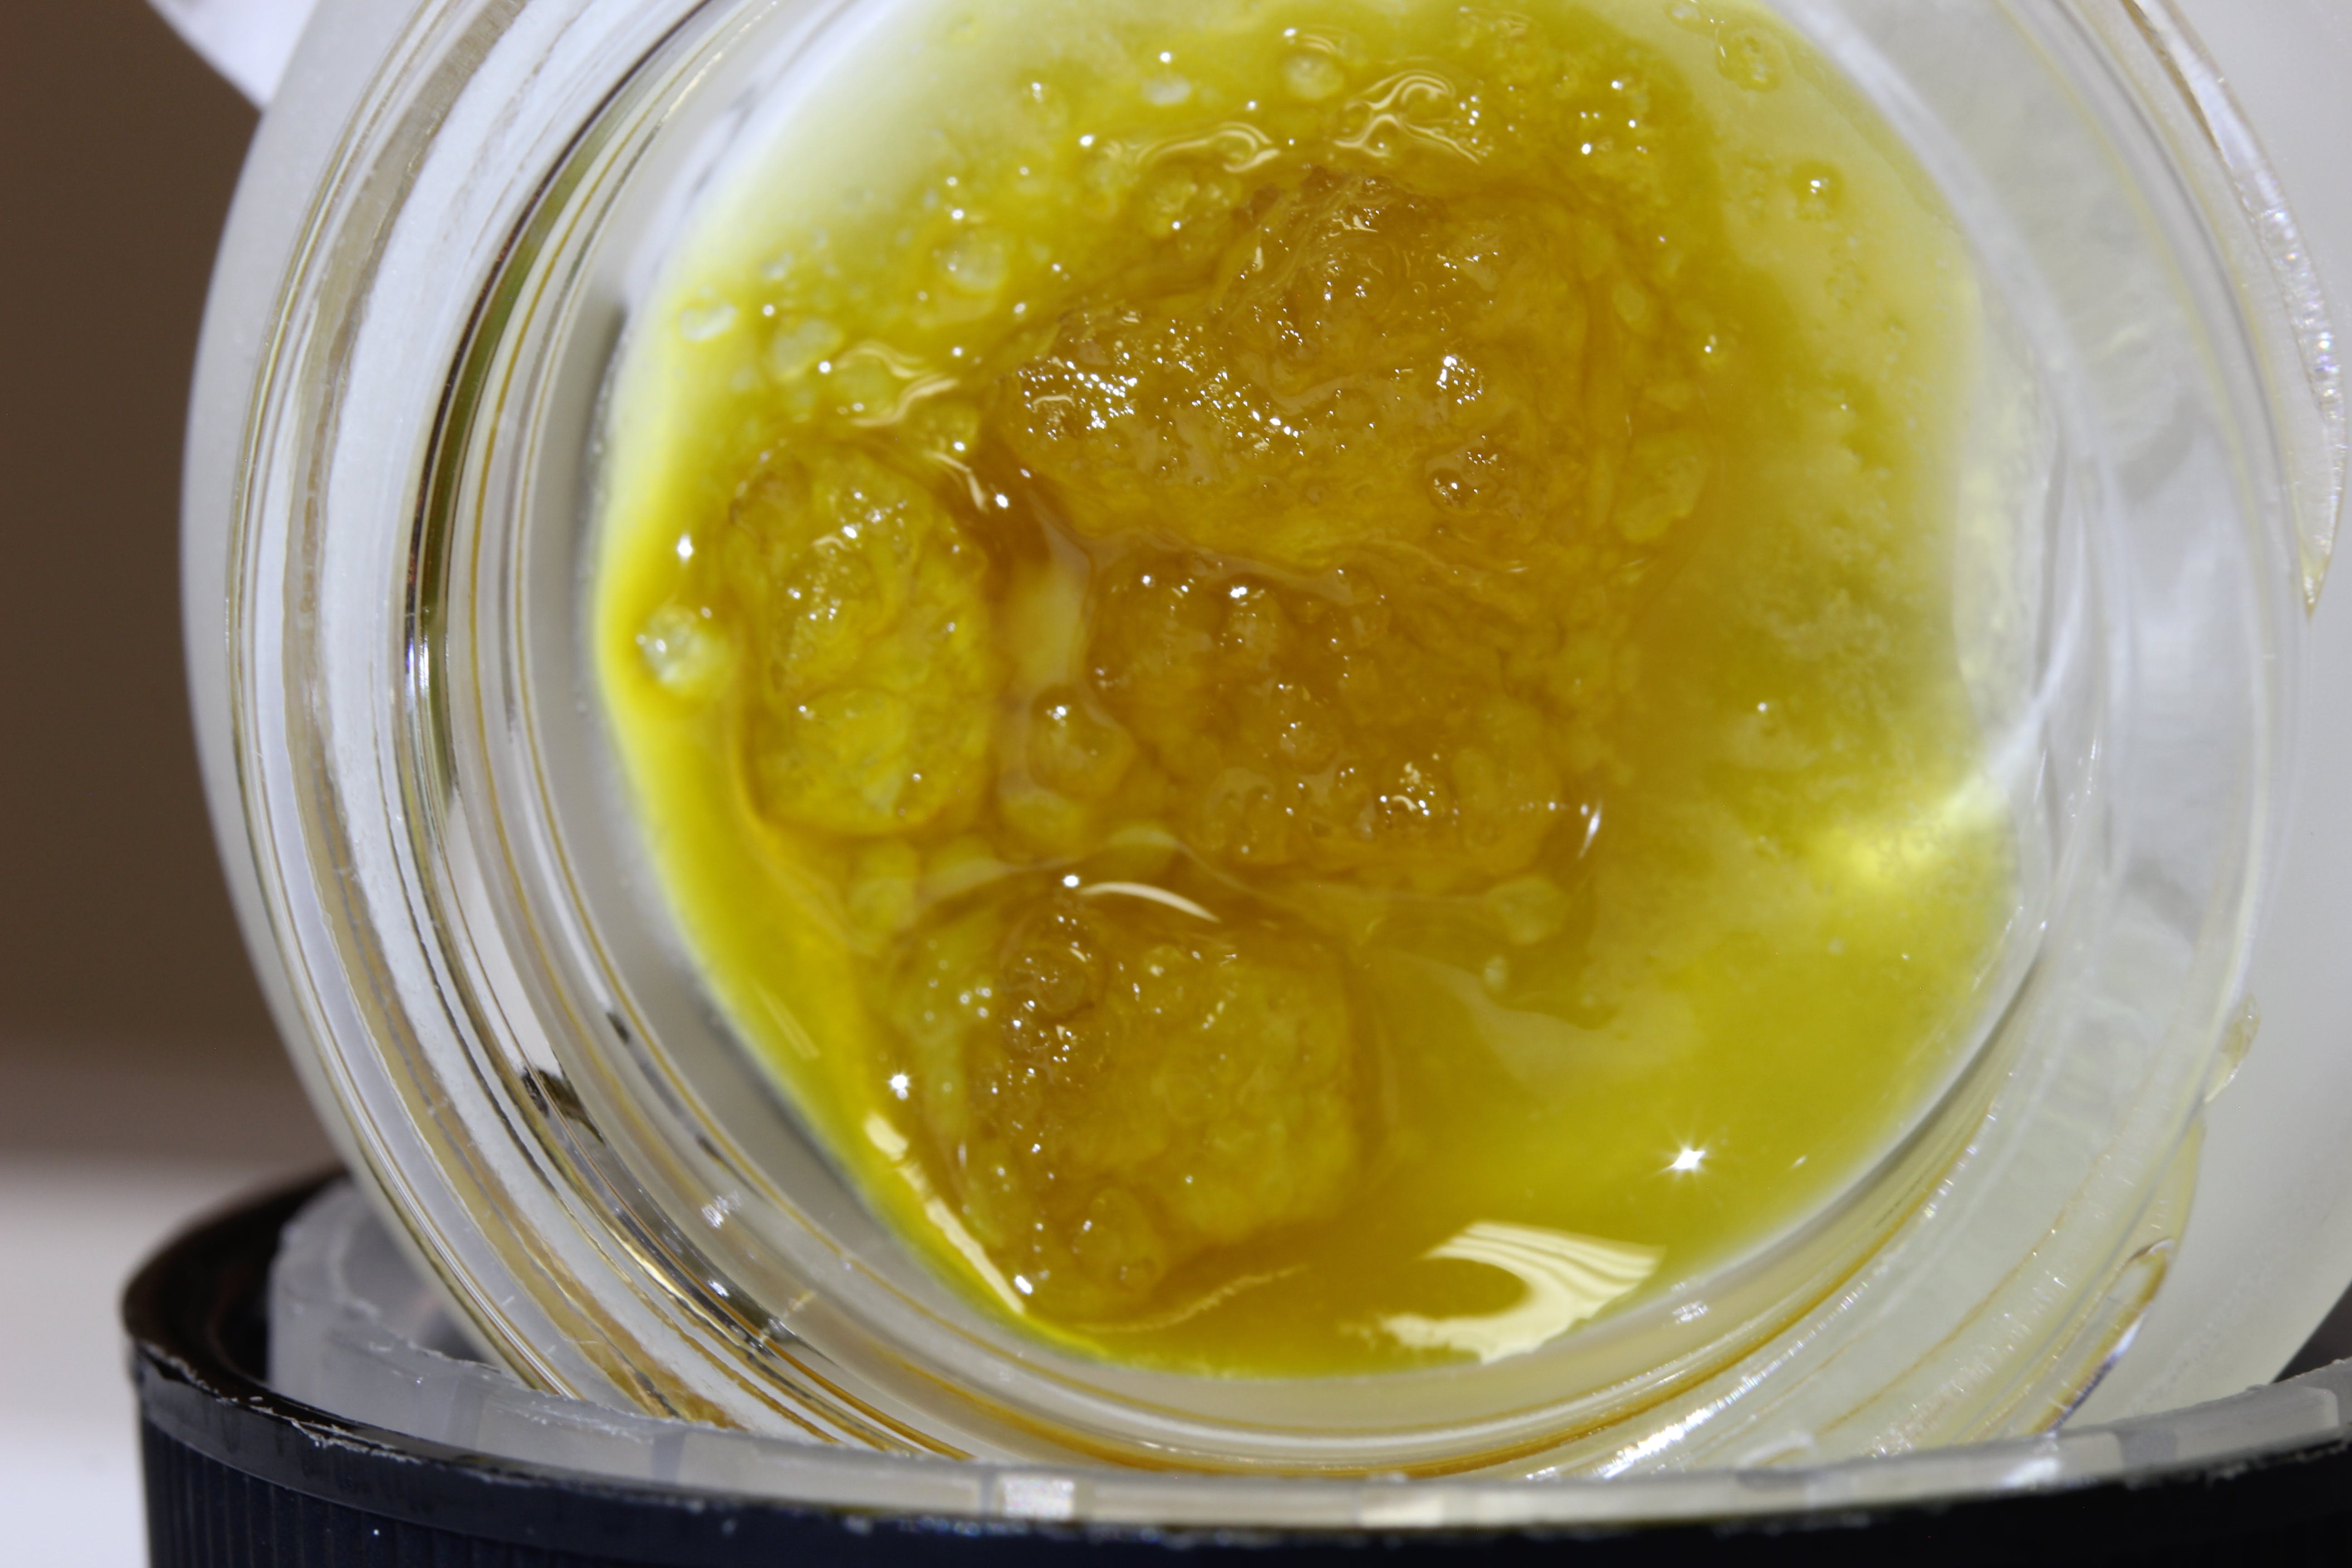 concentrate-harmony-extracts-live-sugar-live-nectar